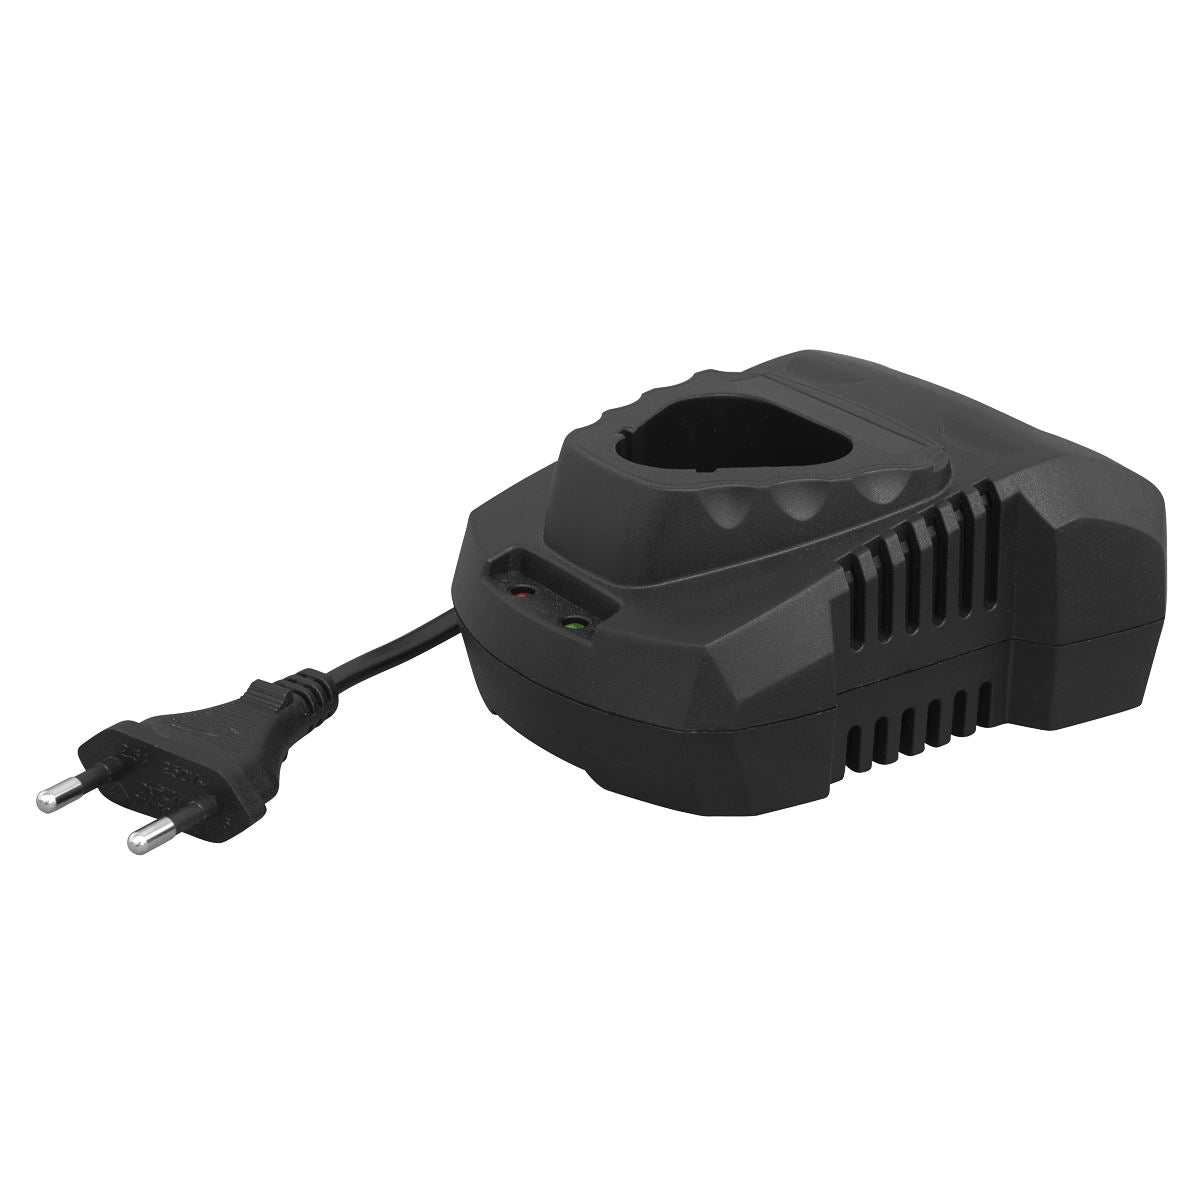 Sealey Battery Charger for 10.8V Lithium-ion SV10.8 Series - European Plug